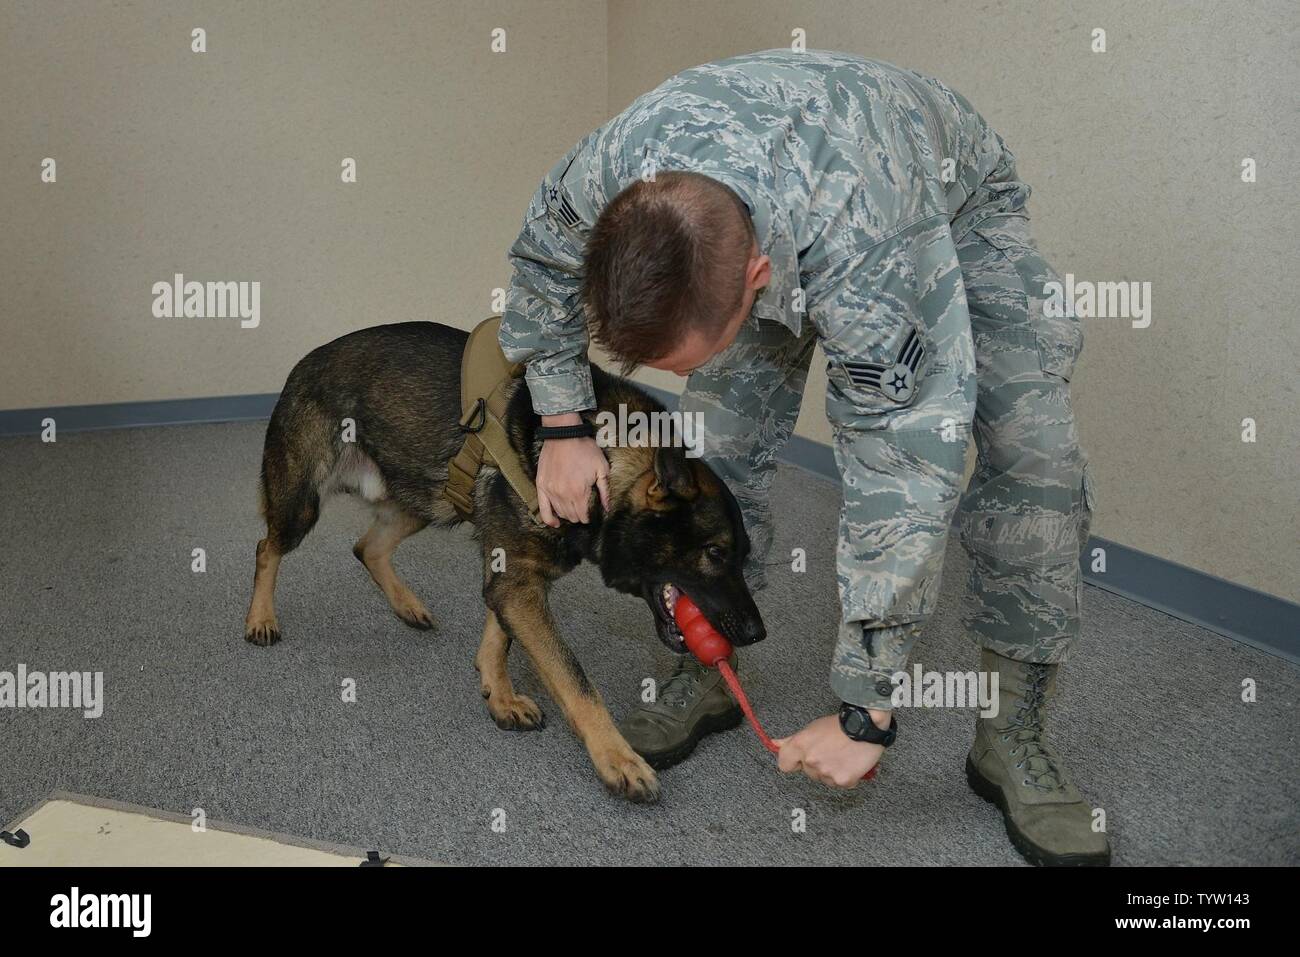 U.S. Air Force Senior Airman Benjamin Howard, 633rd Security Forces Squadron military working dog handler, rewards Rony, a 633rd SFS MWD, after finding an explosive training aid at Joint Base Langley-Eustis, Va., Nov. 29, 2016. During the training, the canine and handler search rooms to find simulated explosive threats to prepare for real-world incidences. Stock Photo